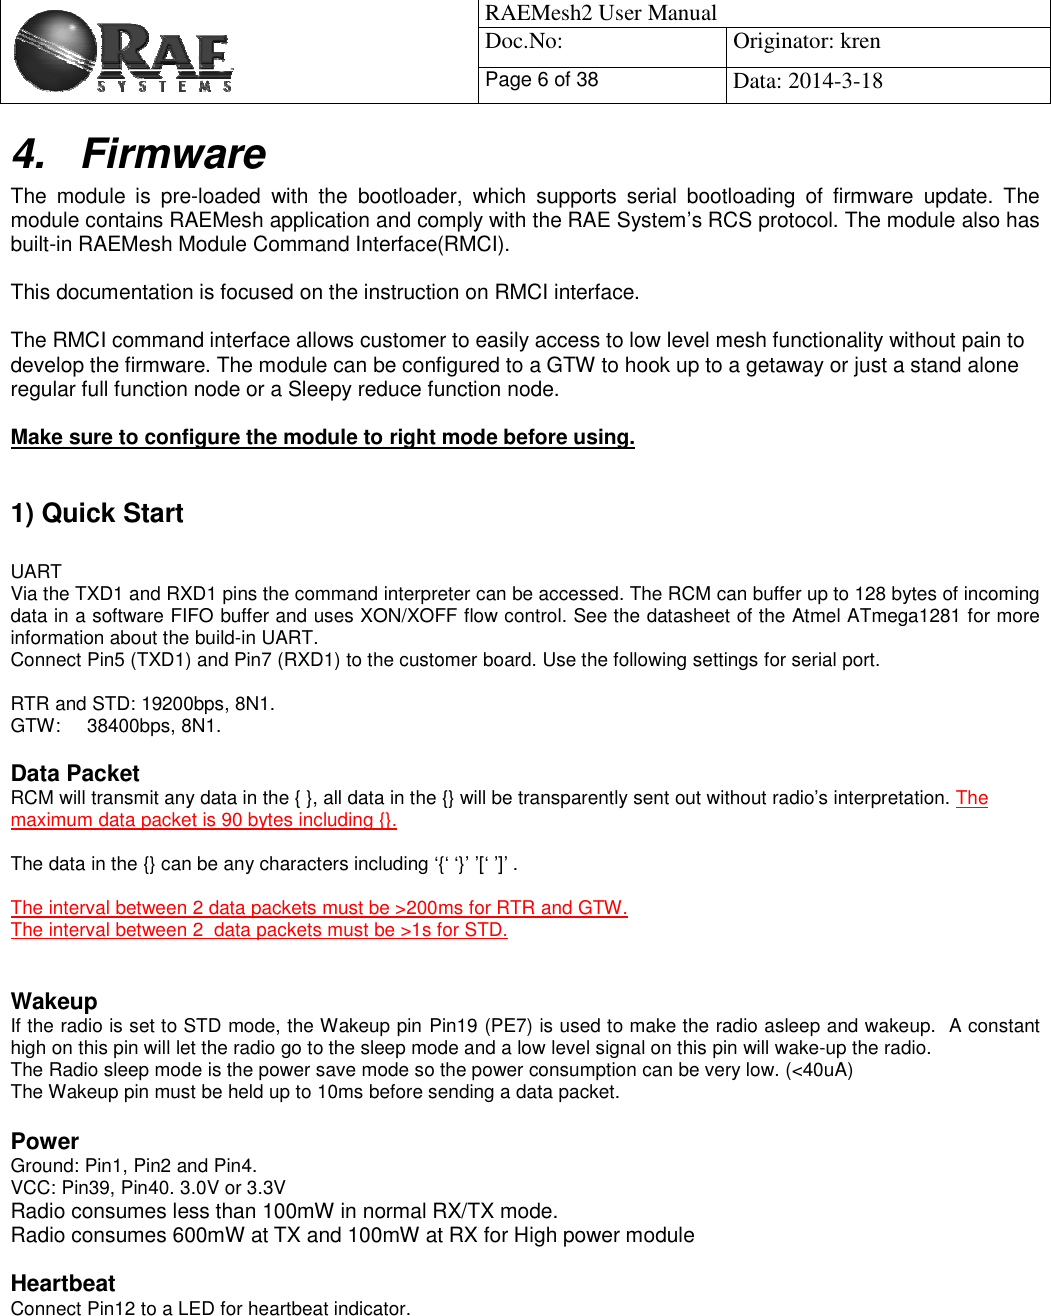                                            RAEMesh2 User Manual Doc.No: Originator: kren Page 6 of 38Data: 2014-3-18 4. Firmware The module is pre-loaded with the bootloader, which supports serial bootloading of firmware update. The module contains RAEMesh application and comply with the RAE System’s RCS protocol. The module also hasbuilt-in RAEMesh Module Command Interface(RMCI).  This documentation is focused on the instruction on RMCI interface.  The RMCI command interface allows customer to easily access to low level mesh functionality without pain to develop the firmware. The module can be configured to a GTW to hook up to a getaway or just a stand alone regular full function node or a Sleepy reduce function node.  Make sure to configure the module to right mode before using.    1) Quick Start  UART  Via the TXD1 and RXD1 pins the command interpreter can be accessed. The RCM can buffer up to 128 bytes of incoming data in a software FIFO buffer and uses XON/XOFF flow control. See the datasheet of the Atmel ATmega1281 for more information about the build-in UART.  Connect Pin5 (TXD1) and Pin7 (RXD1) to the customer board. Use the following settings for serial port.RTR and STD: 19200bps, 8N1. GTW:     38400bps, 8N1.  Data Packet RCM will transmit any data in the { }, all data in the {} will be transparently sent out without radio’s interpretation. The maximum data packet is 90 bytes including {}.The data in the {} can be any characters including ‘{‘ ‘}’ ’[‘ ’]’ . The interval between 2 data packets must be &gt;200ms for RTR and GTW.The interval between 2  data packets must be &gt;1s for STD.   Wakeup If the radio is set to STD mode, the Wakeup pin Pin19 (PE7) is used to make the radio asleep and wakeup.  A constant high on this pin will let the radio go to the sleep mode and a low level signal on this pin will wake-up the radio. The Radio sleep mode is the power save mode so the power consumption can be very low. (&lt;40uA) The Wakeup pin must be held up to 10ms before sending a data packet.  Power Ground: Pin1, Pin2 and Pin4. VCC: Pin39, Pin40. 3.0V or 3.3V Radio consumes less than 100mW in normal RX/TX mode. Radio consumes 600mW at TX and 100mW at RX for High power module Heartbeat Connect Pin12 to a LED for heartbeat indicator.  